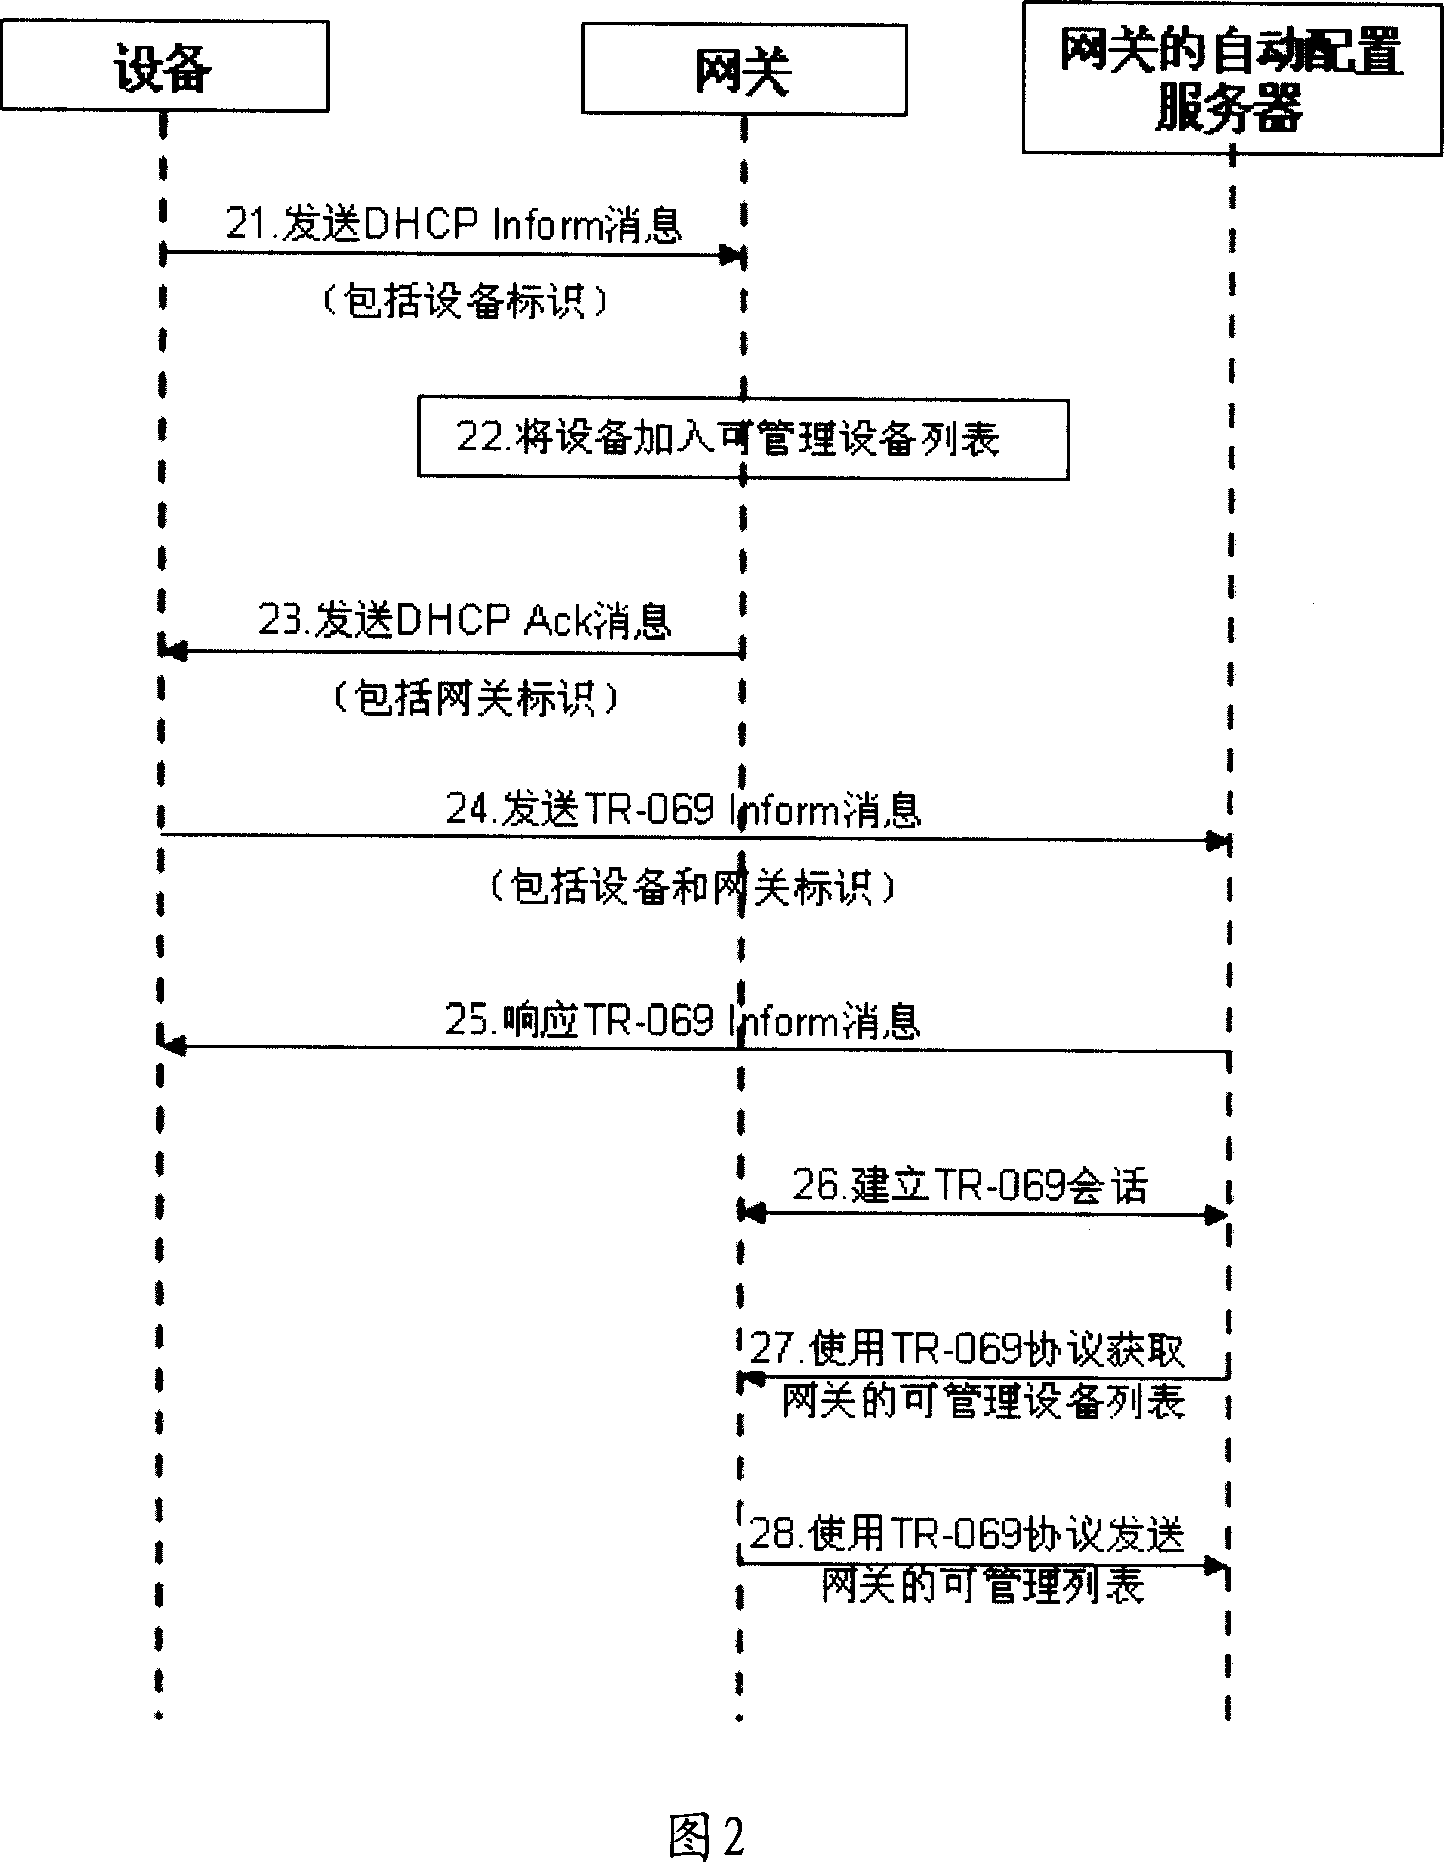 Method and system for managing configuration of network devices